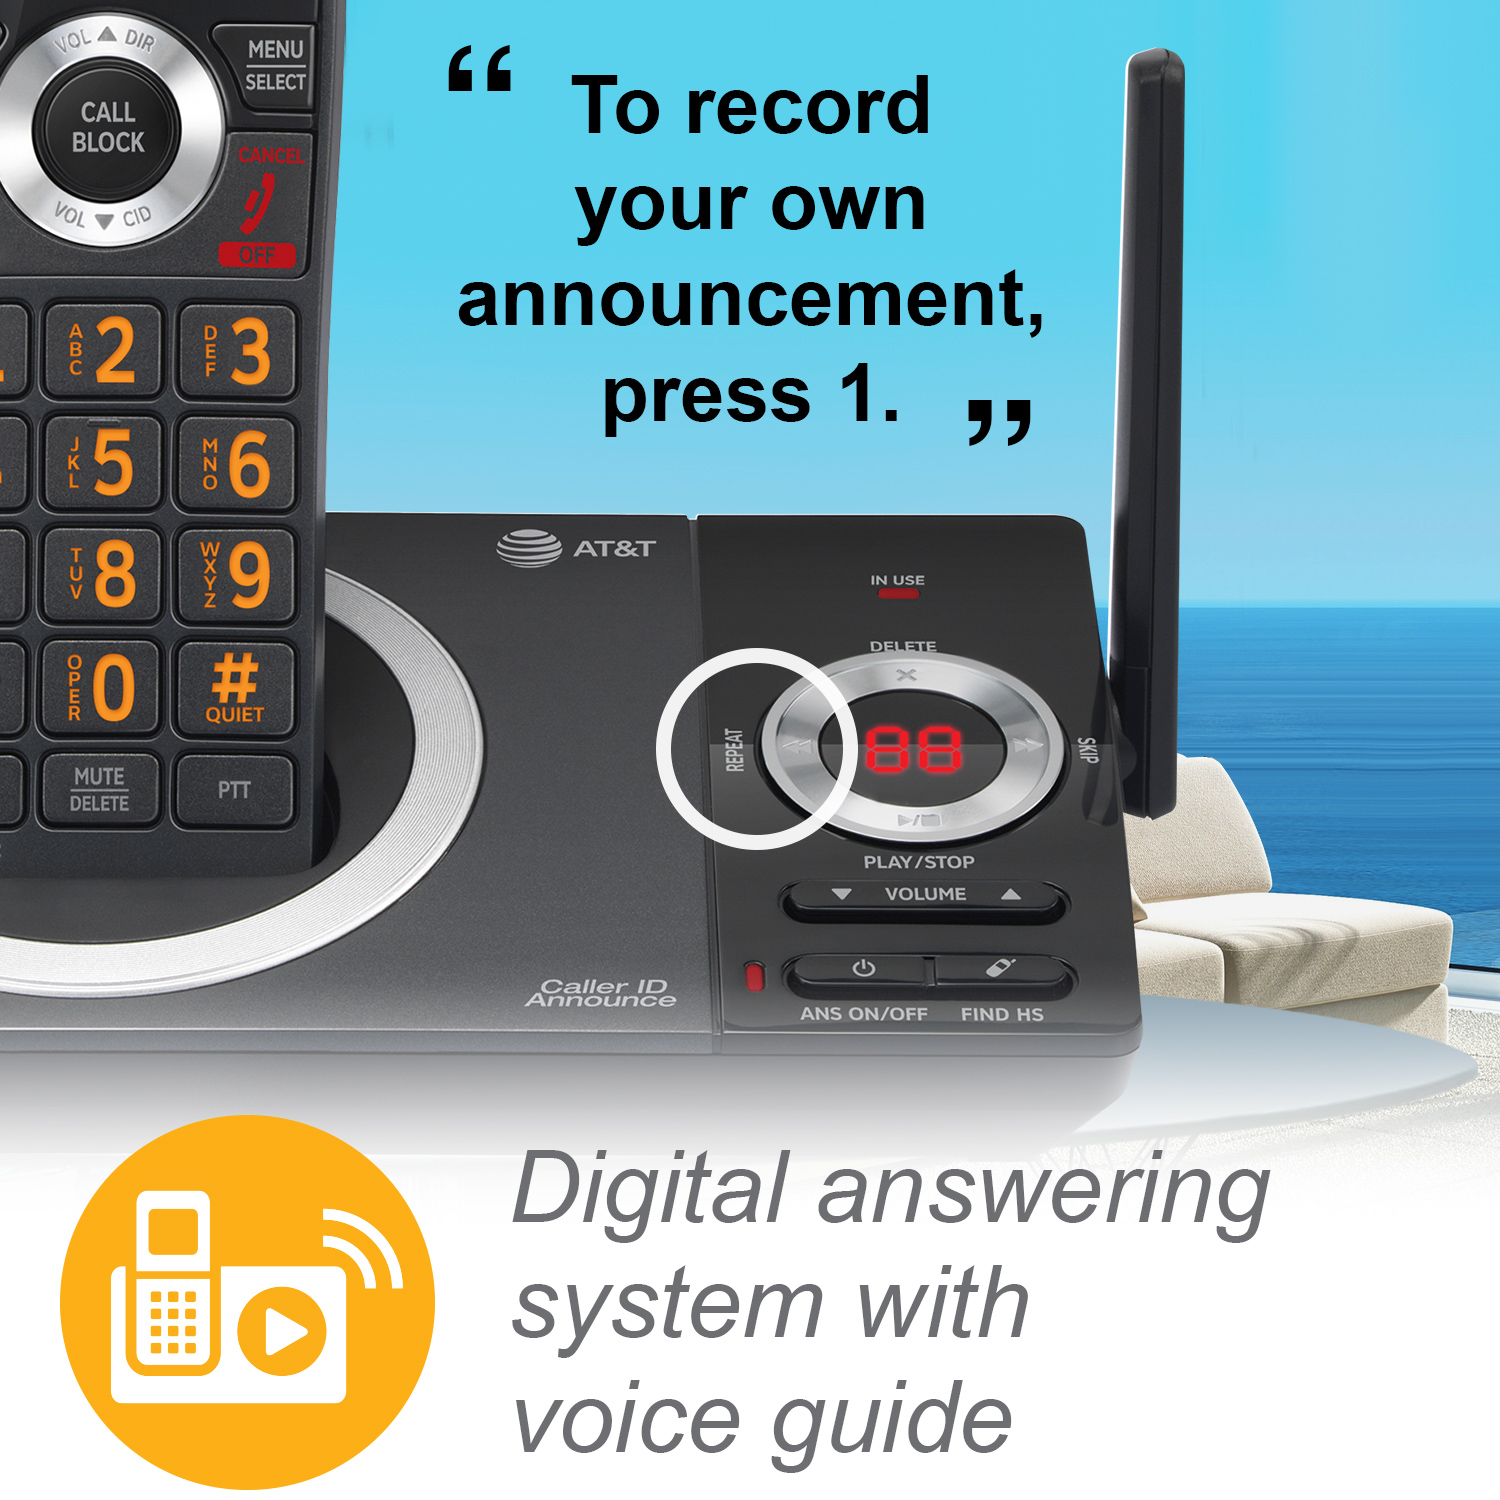 5-Handset Expandable Cordless Phone with Unsurpassed Range, Smart Call Blocker and Answering System - view 6